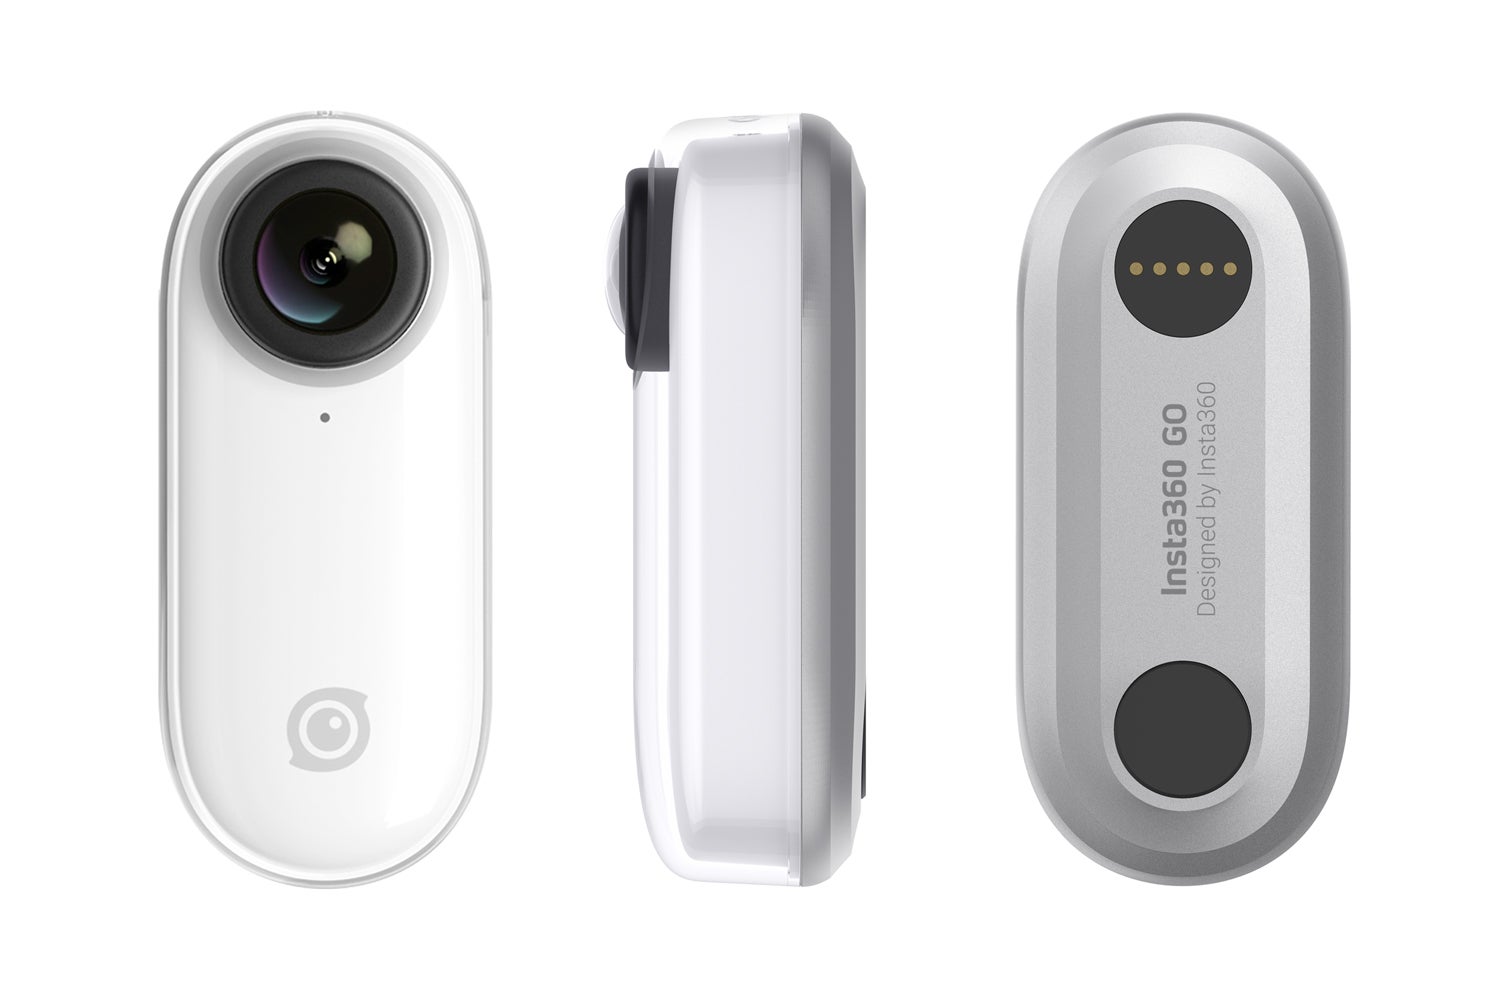 The Insta360 GO is a wearable camera that weighs less than an ounce